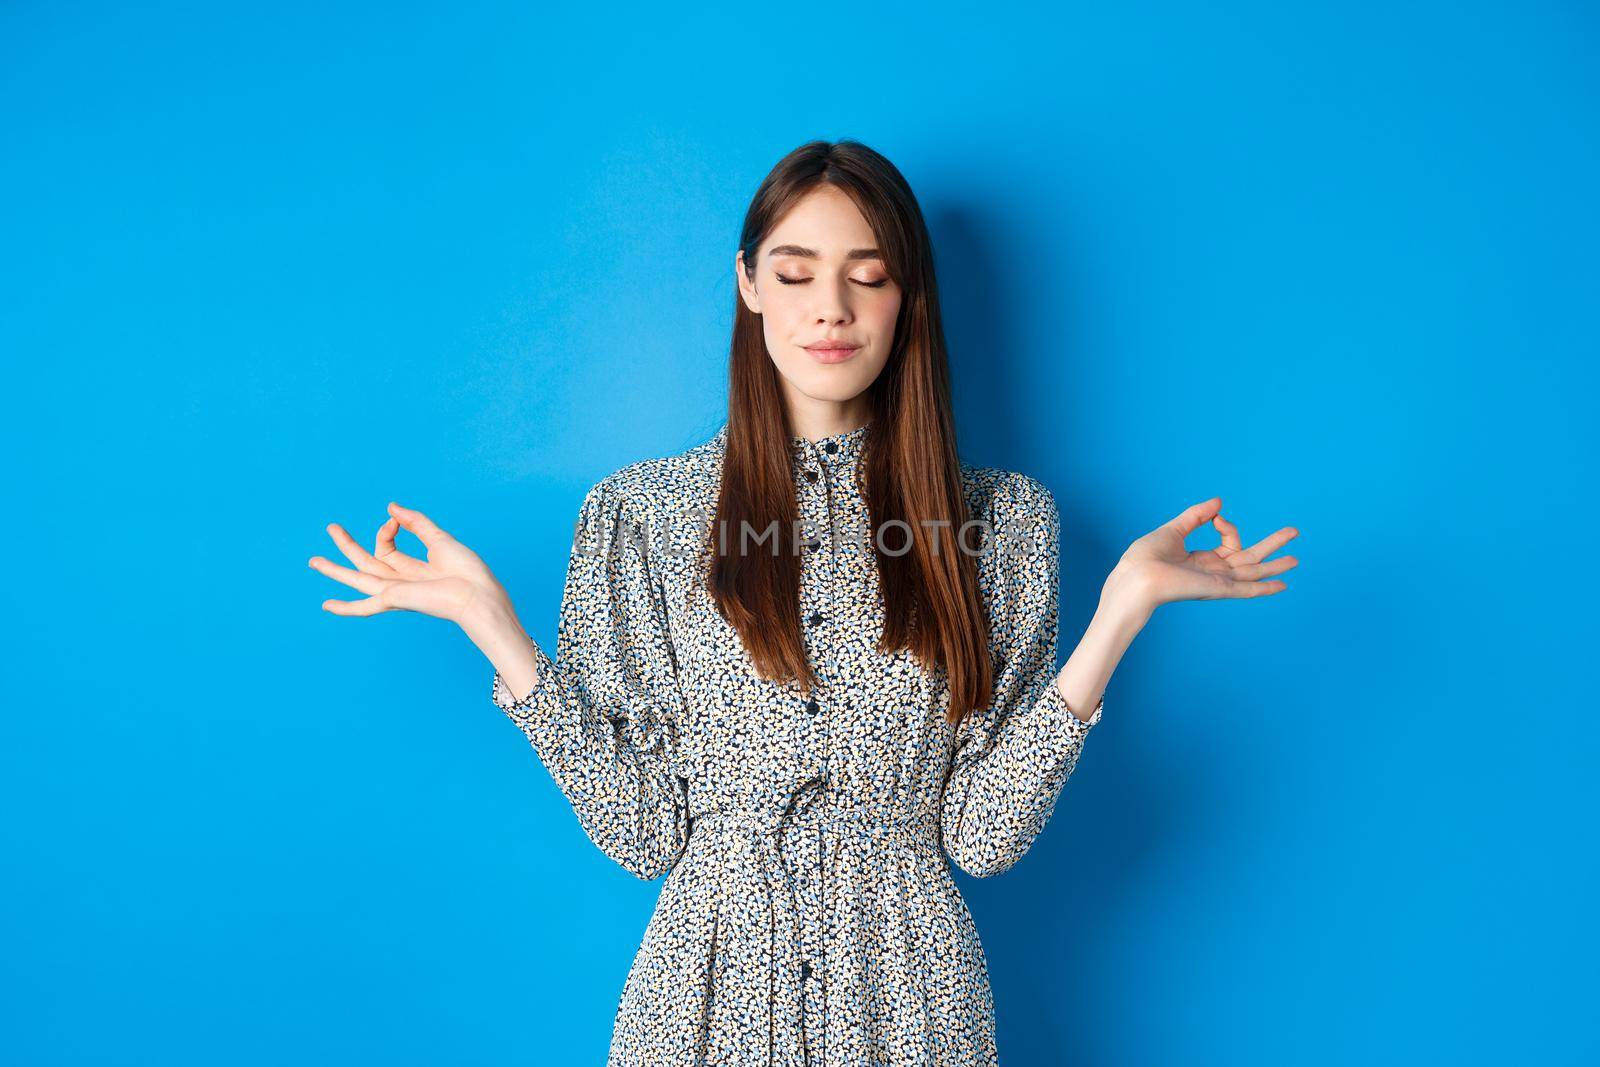 Mindful young woman in dress, close eyes and smile, meditating peaceful, standing with hands spread sideways with zen sign, blue background.